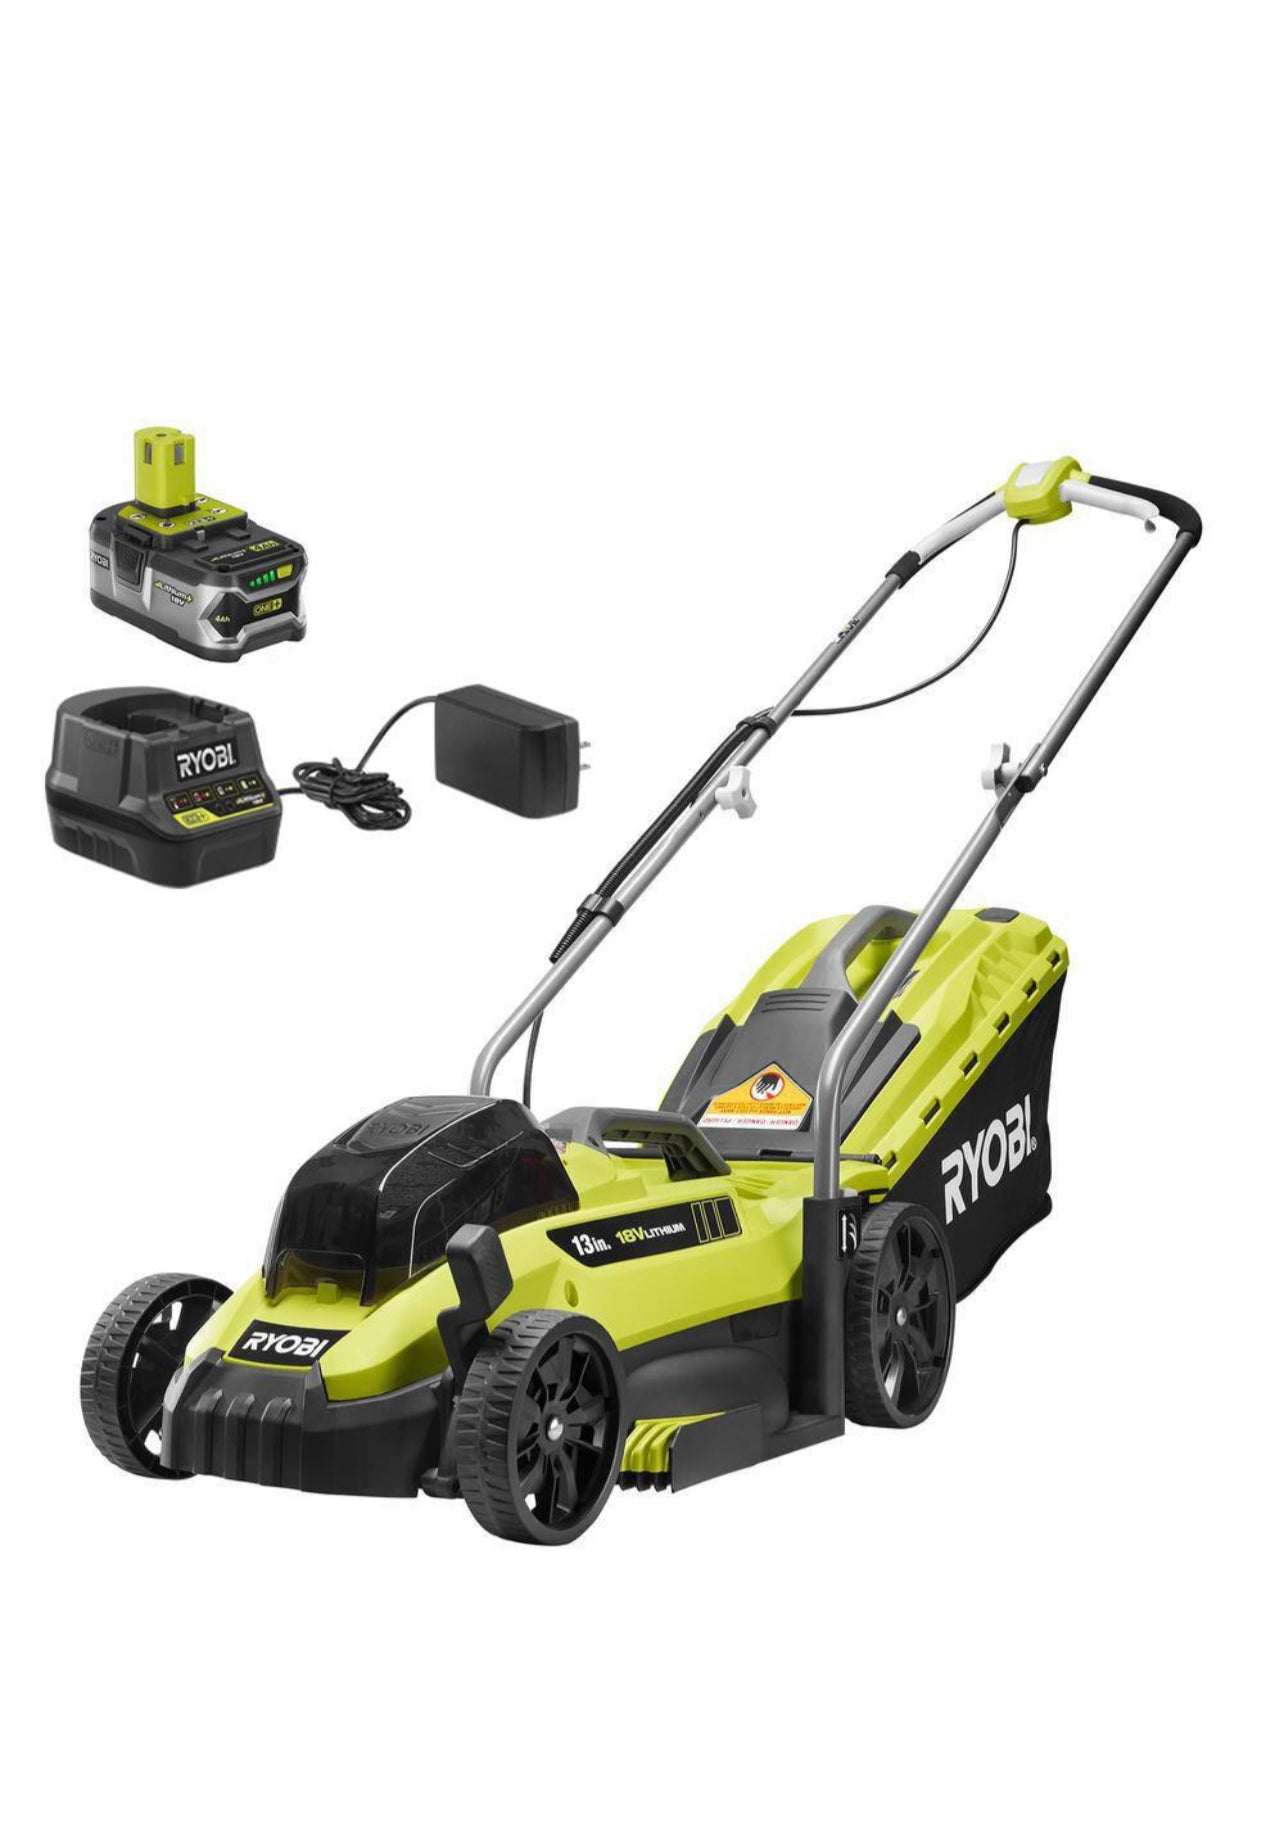 Ryobi 13 in. ONE+ 18V Lithium-Ion Cordless Battery Walk Behind Push Lawn Mower - 4.0 Ah Battery/Charger Included Damaged Box